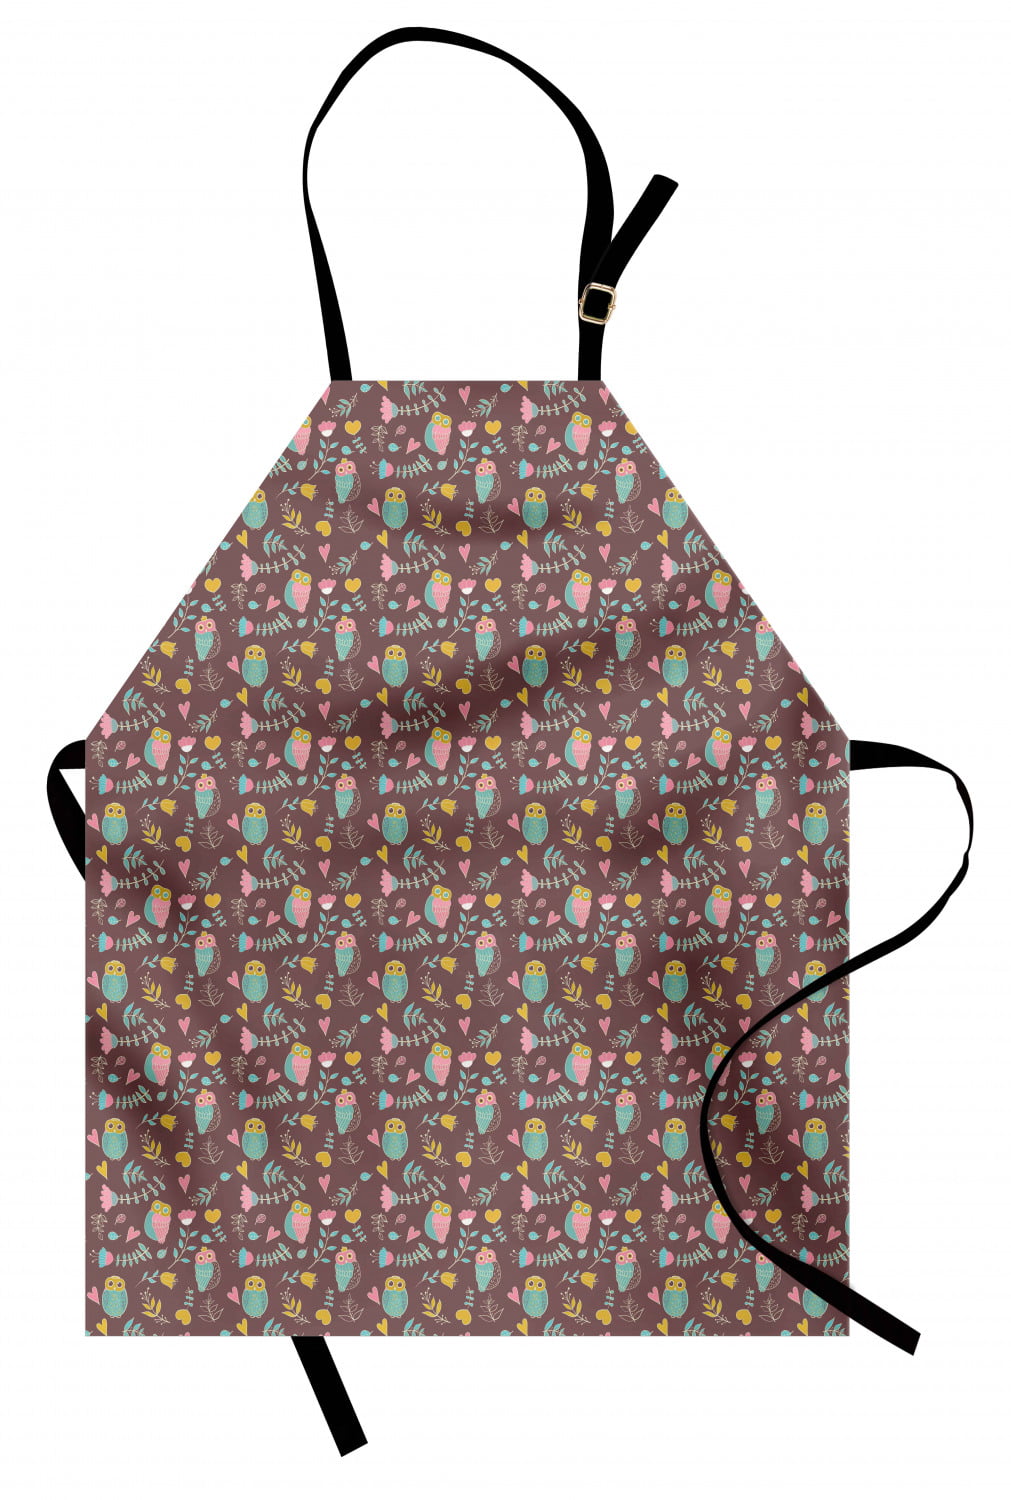 Details about   Ambesonne Apron Bib Adjustable Strap for Gardening Cooking Unisex Durable 